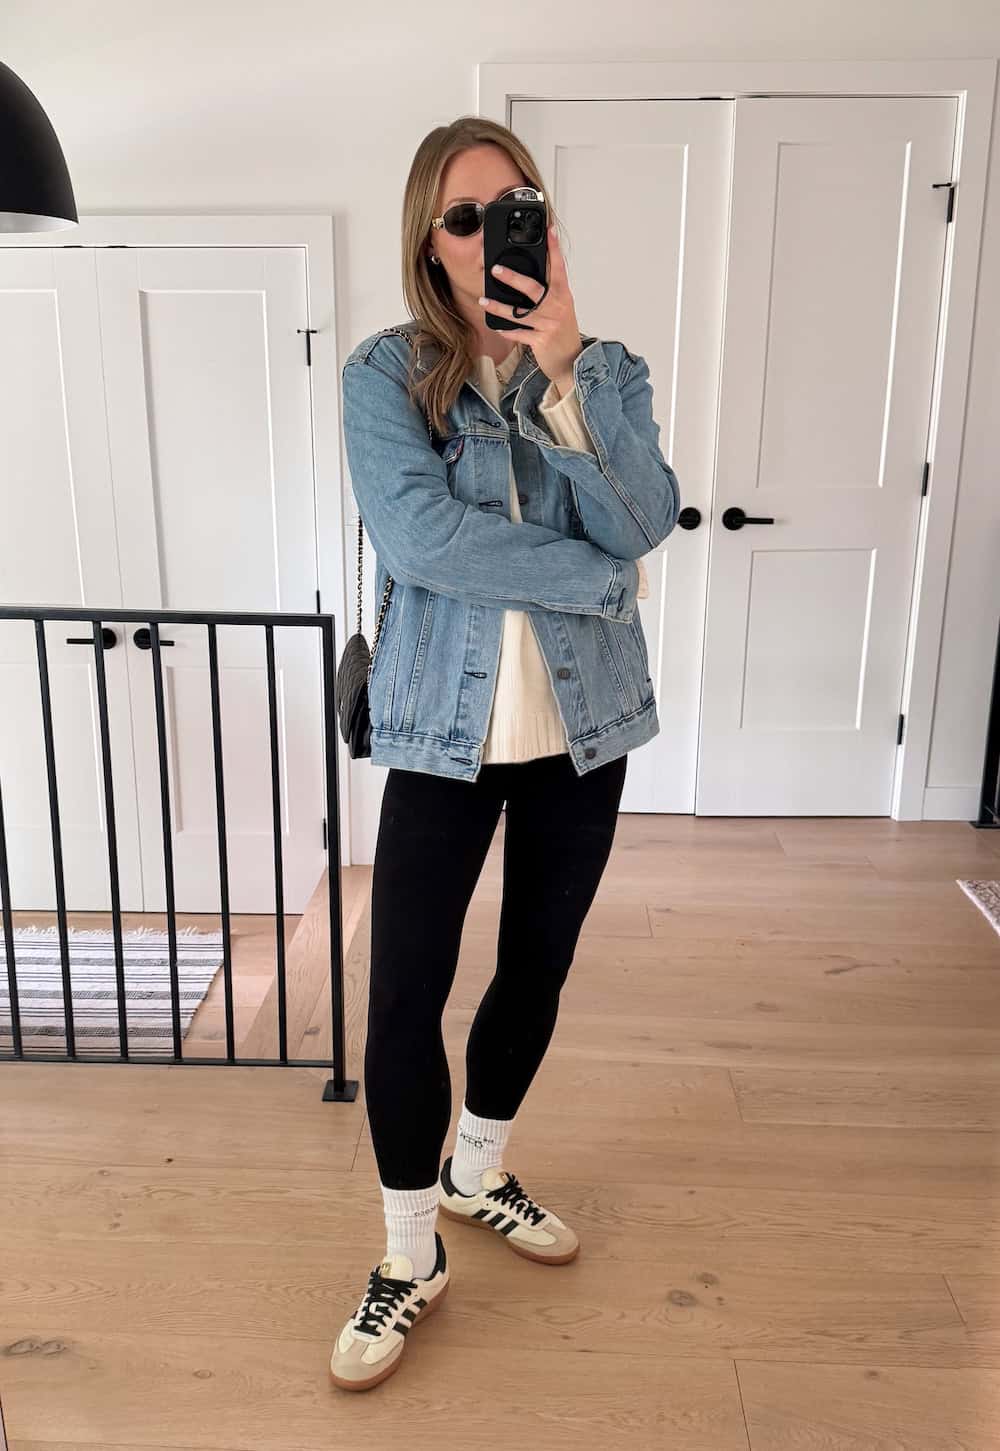 Christal wearing leggings with a white sweater and a denim jacket with sneakers.